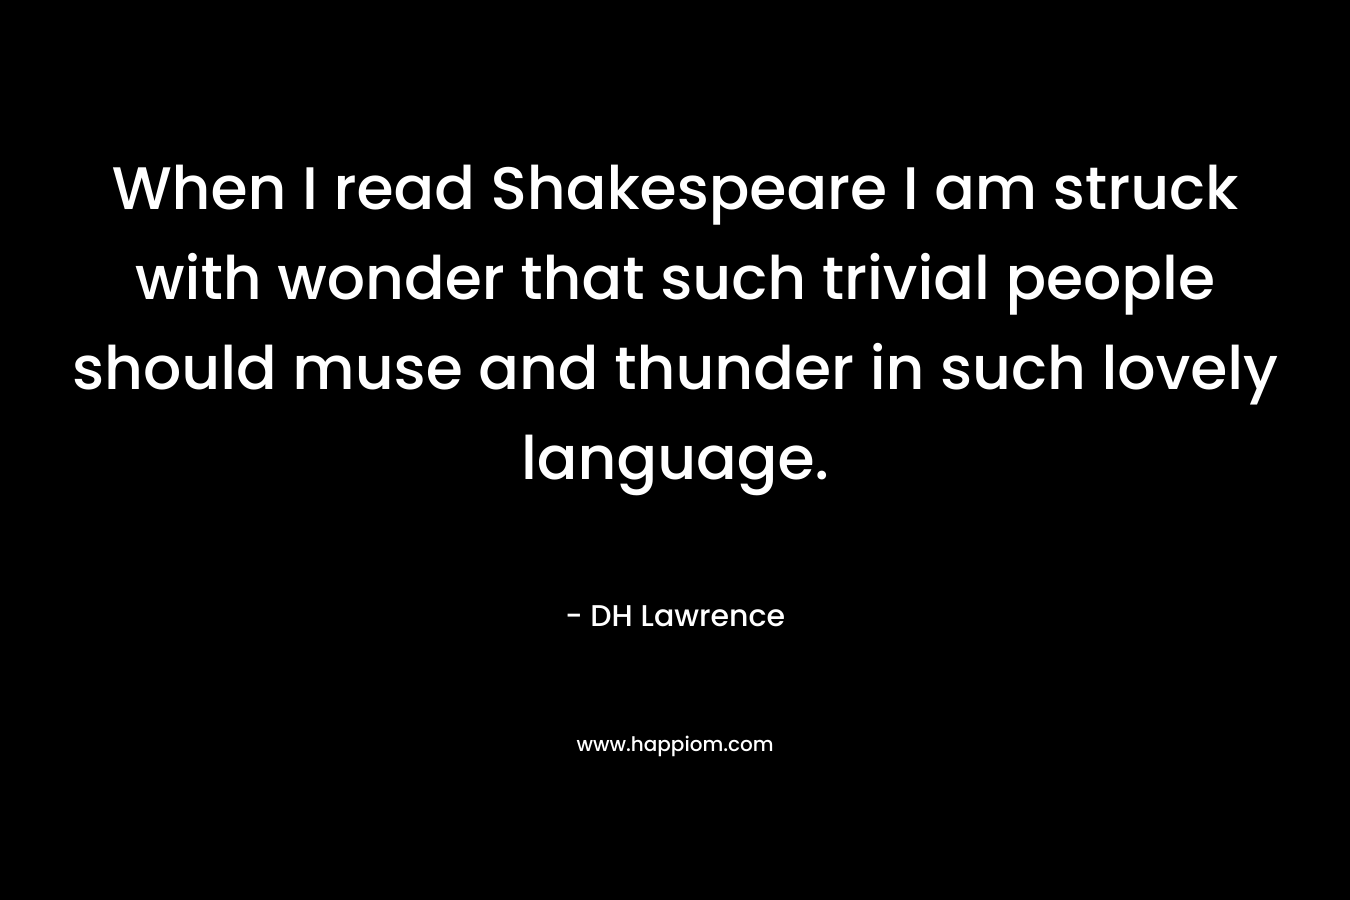 When I read Shakespeare I am struck with wonder that such trivial people should muse and thunder in such lovely language. – DH Lawrence